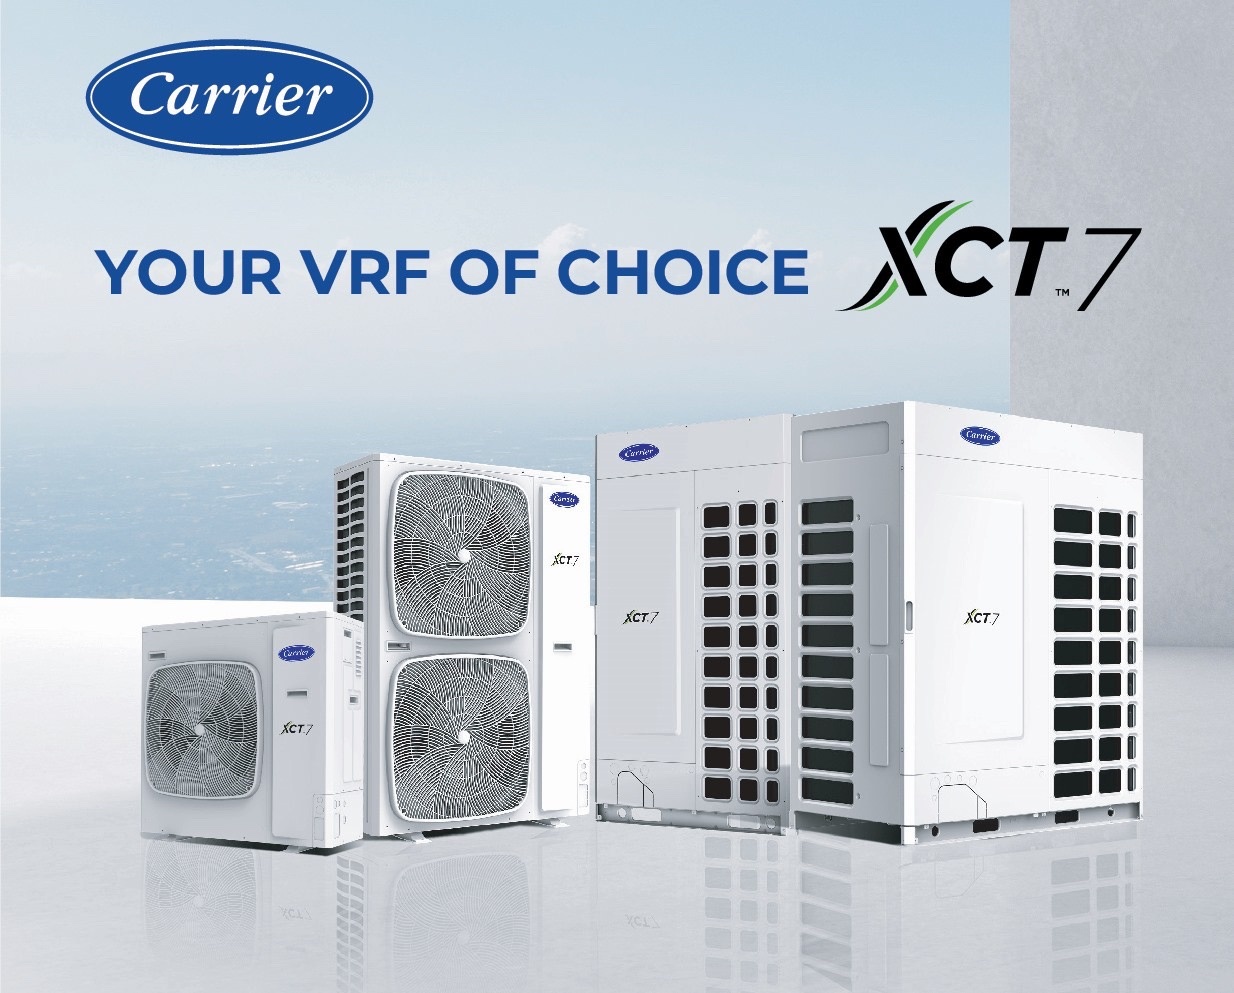 Carrier Vietnam introduces new variable refrigerant flow system